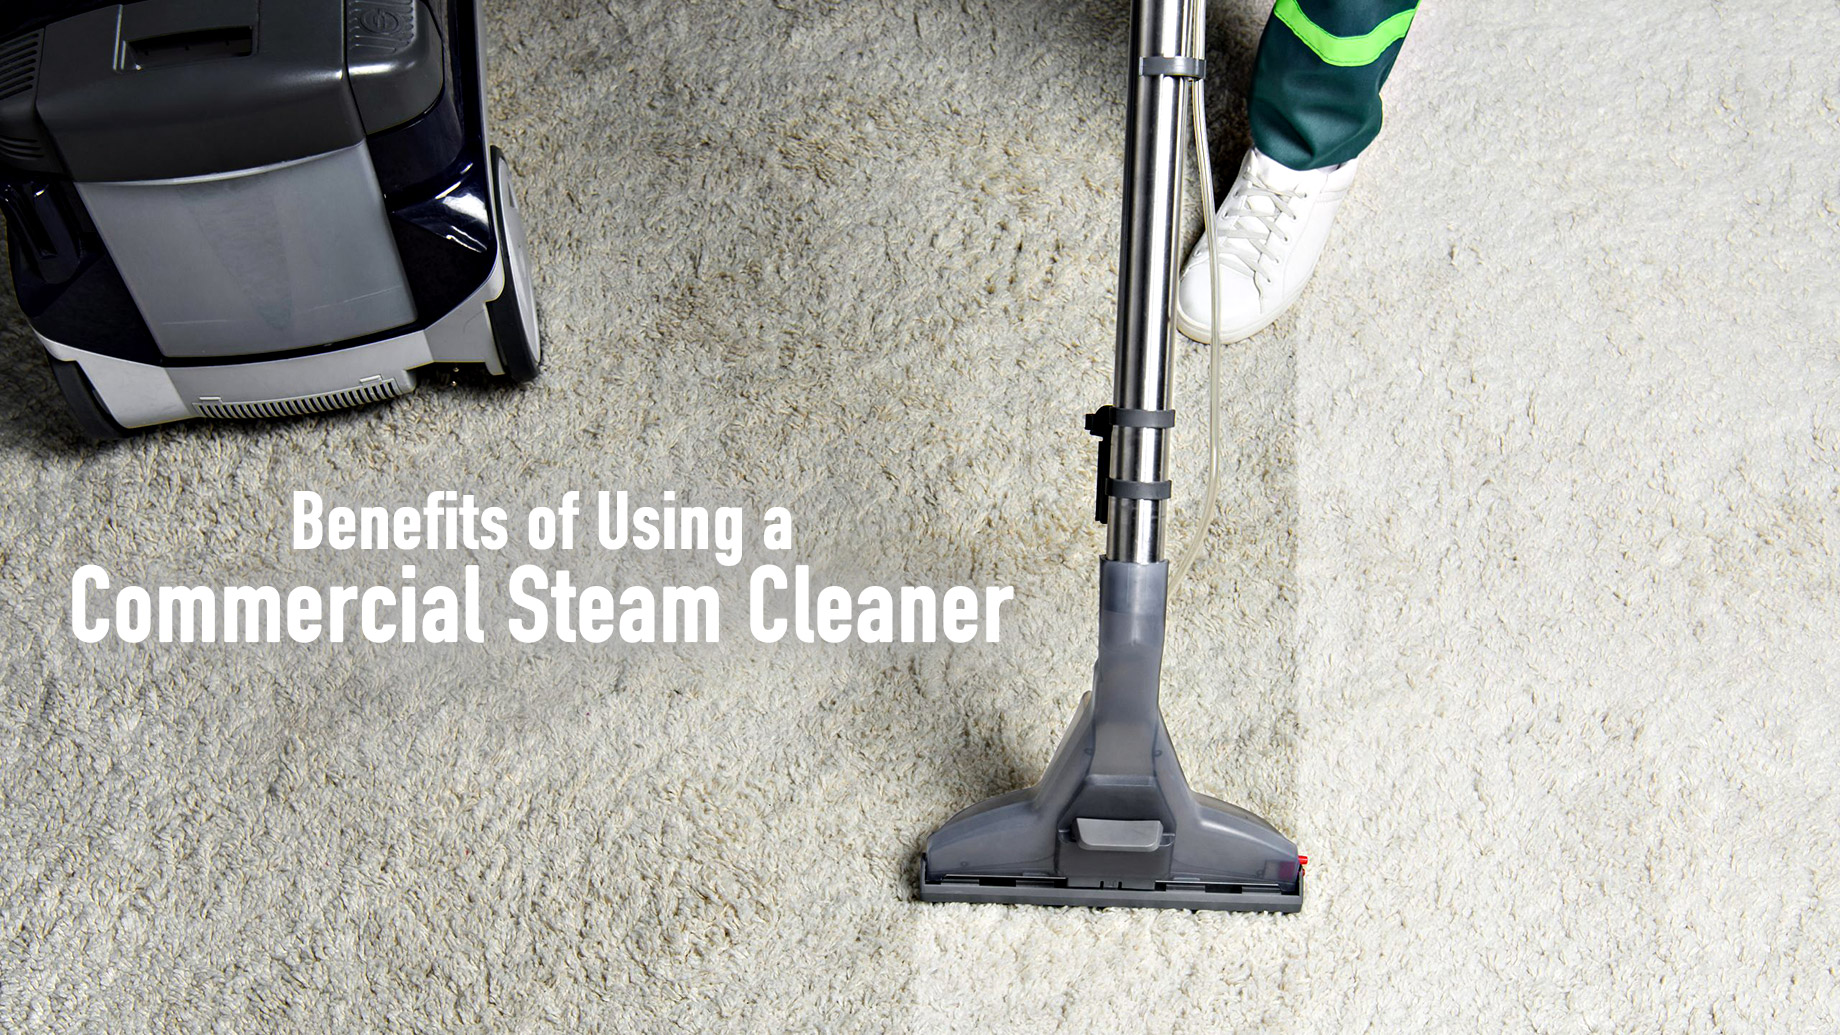 Benefits of Using a Commercial Steam Cleaner